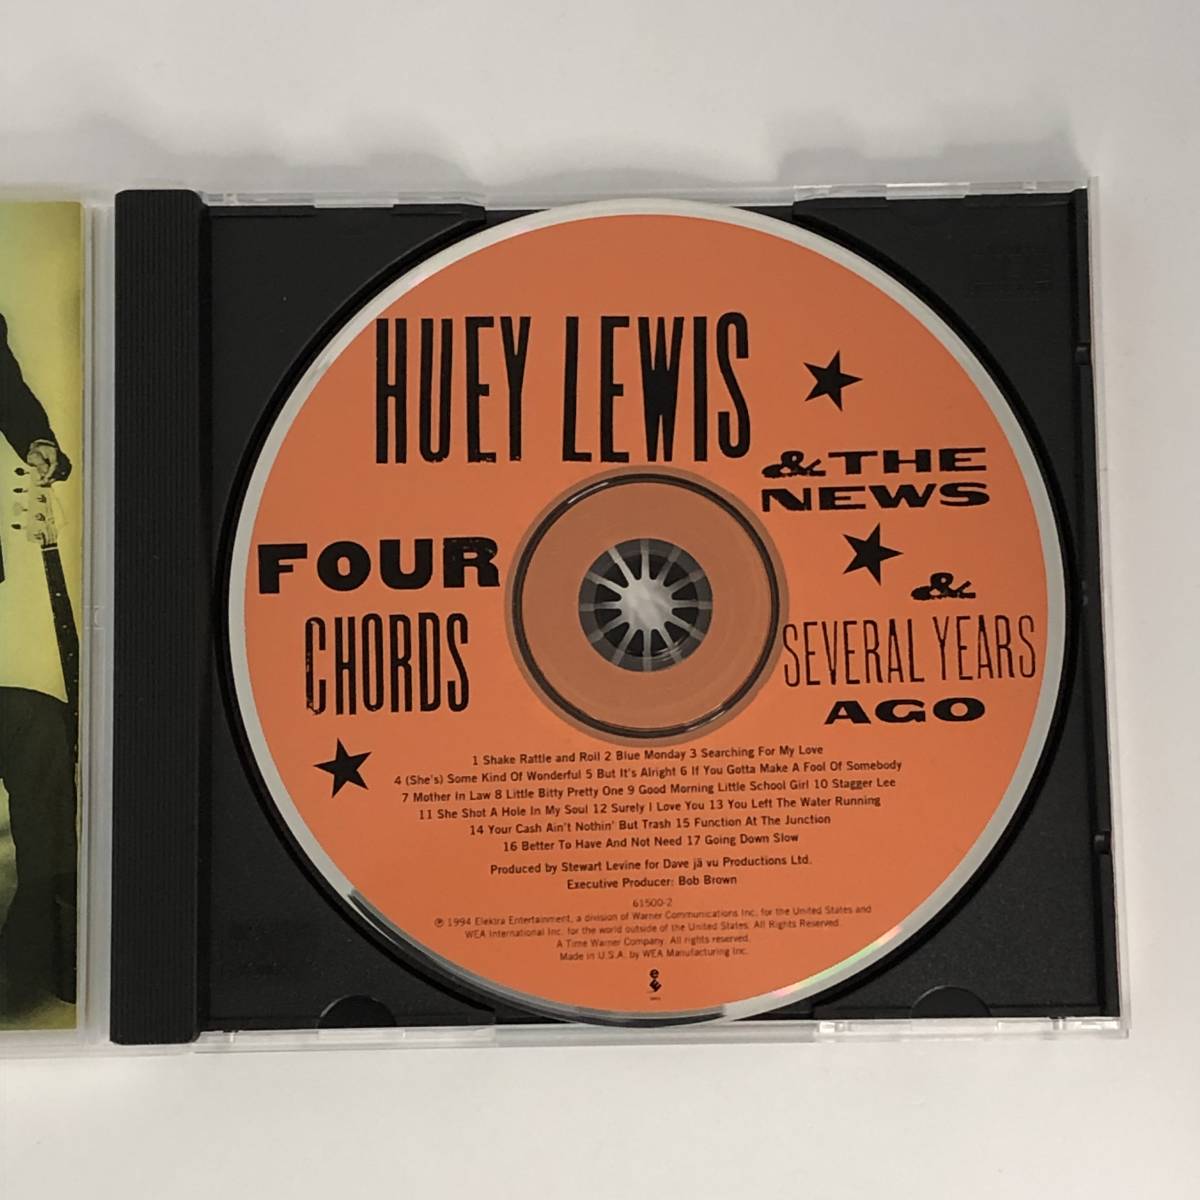 US盤 中古CD Huey Lewis And The News Four Chords & Several Years Ago ヒューイ・ルイス・アンド・ザ・ニュース 個人所有 (e_画像2